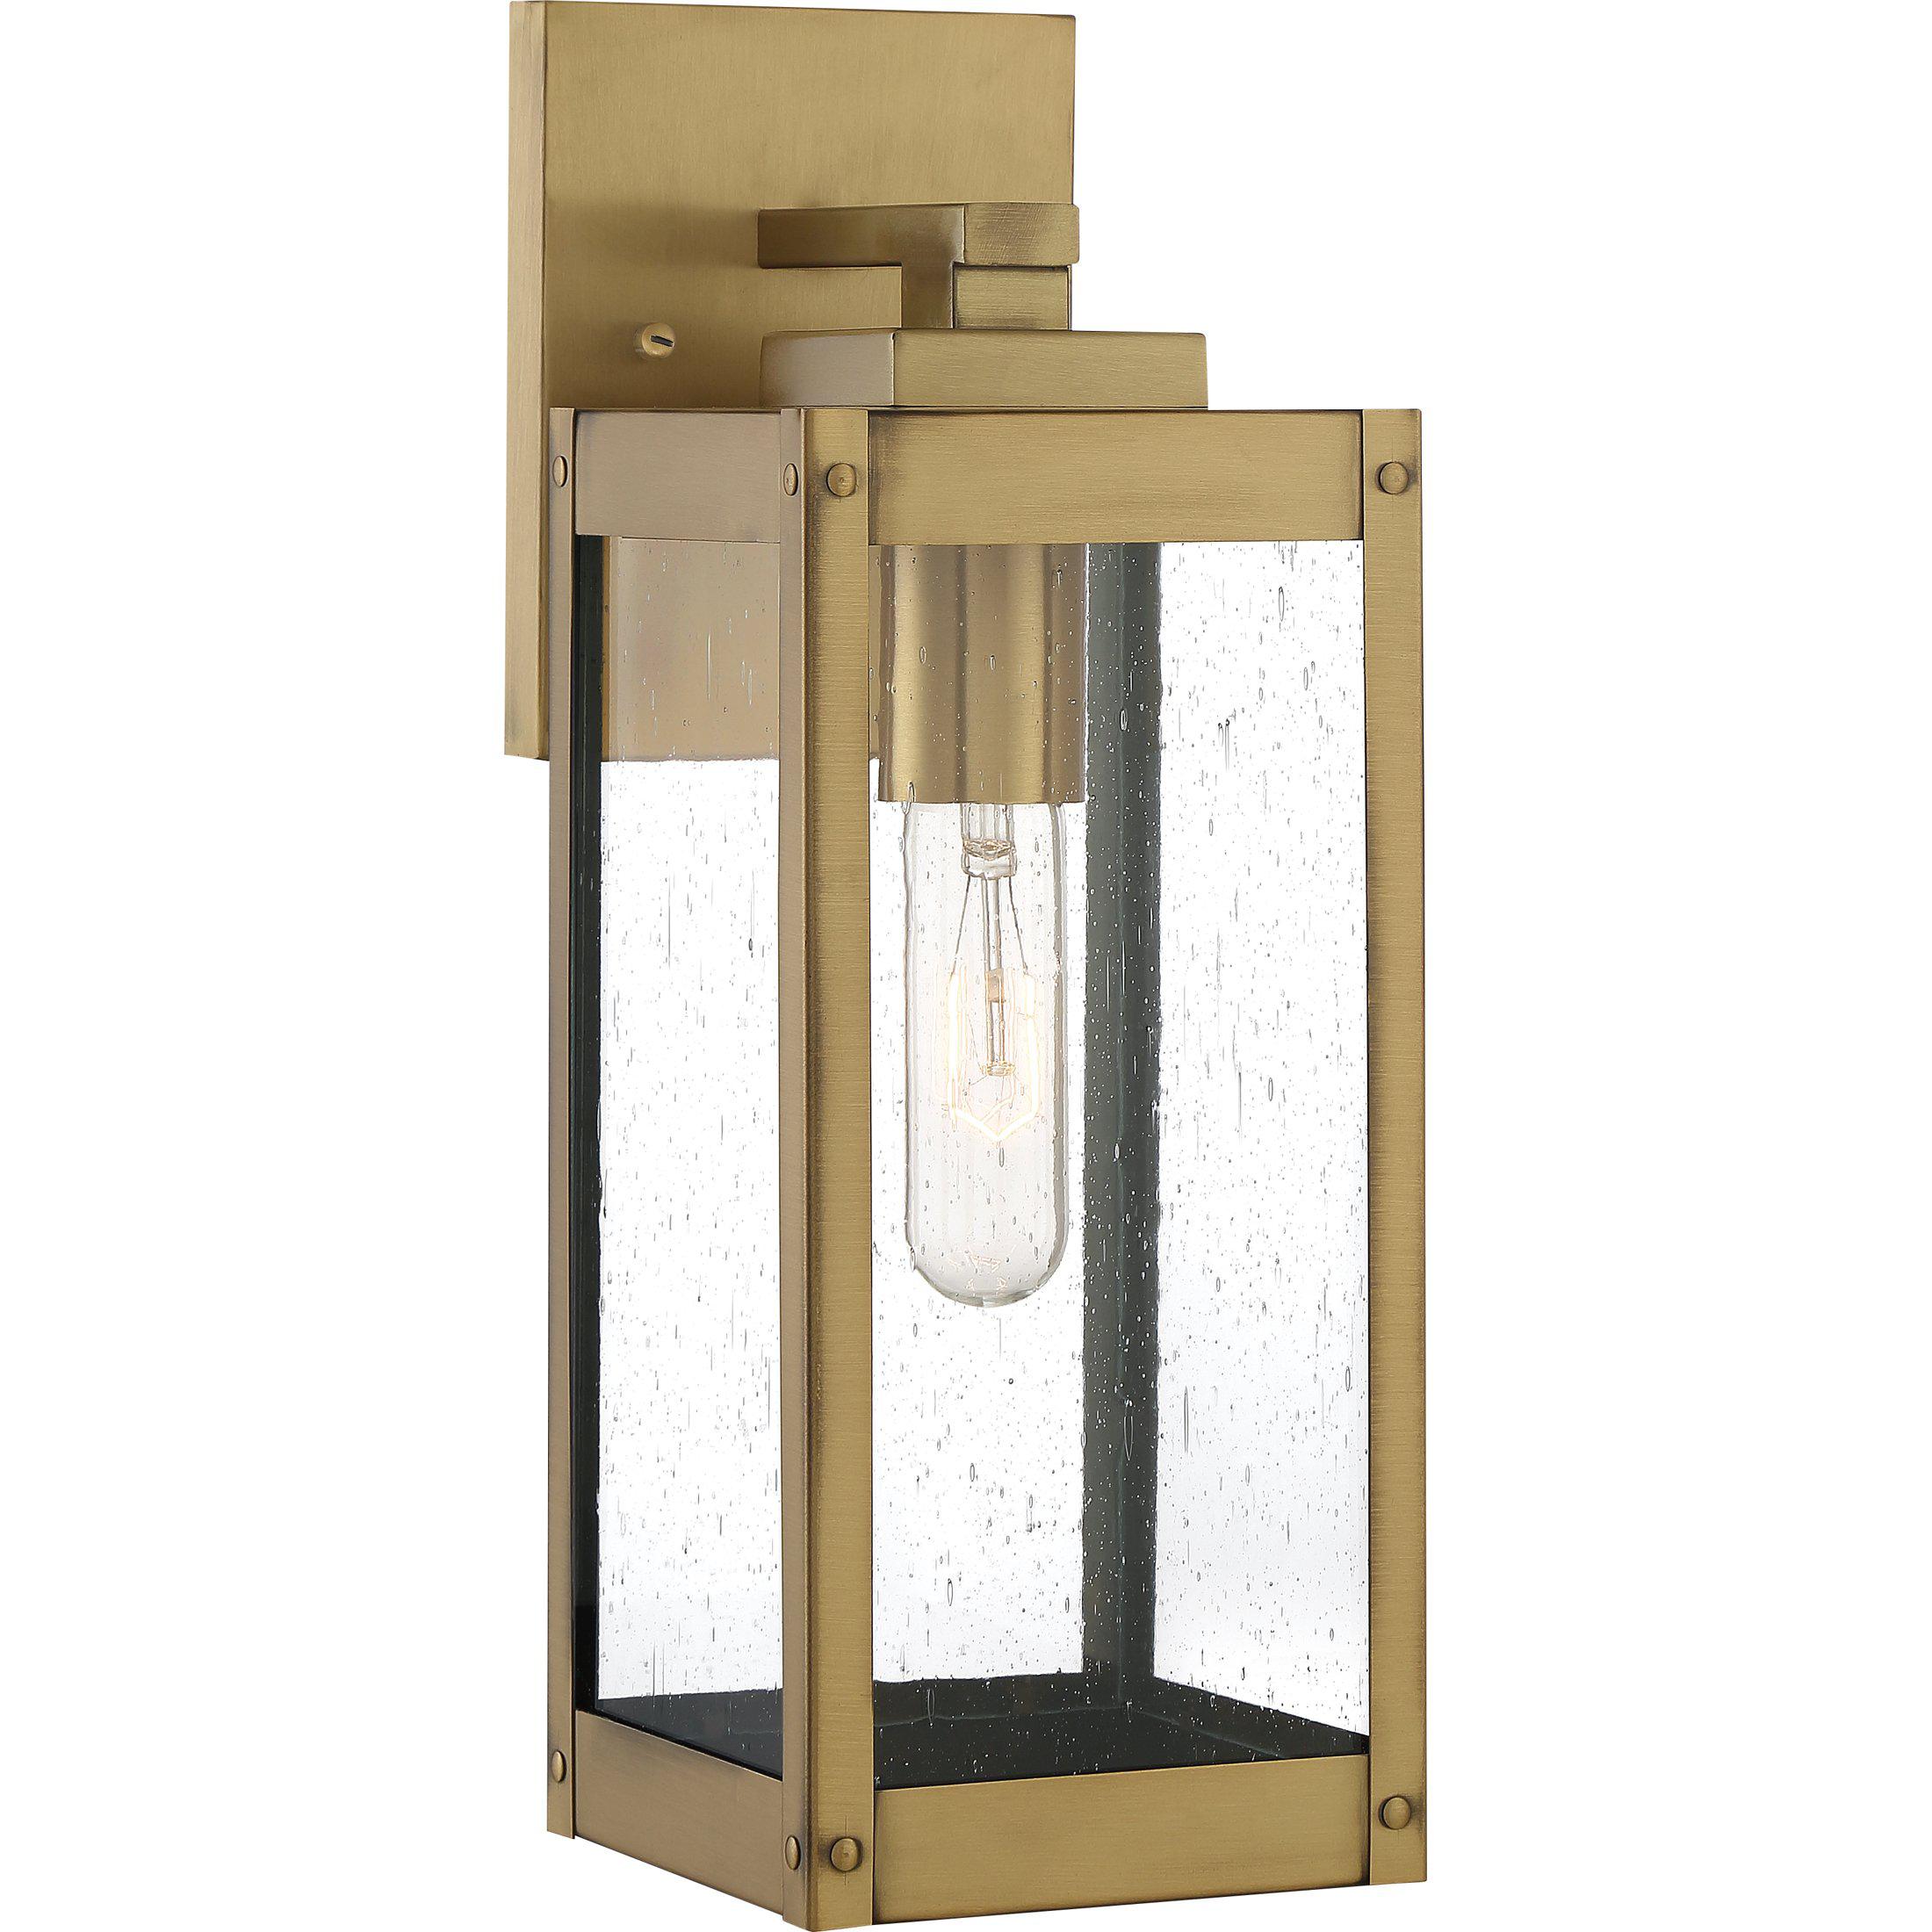 Quoizel  Westover Outdoor Lantern, Small WVR8405 Outdoor l Wall Quoizel Antique Brass  